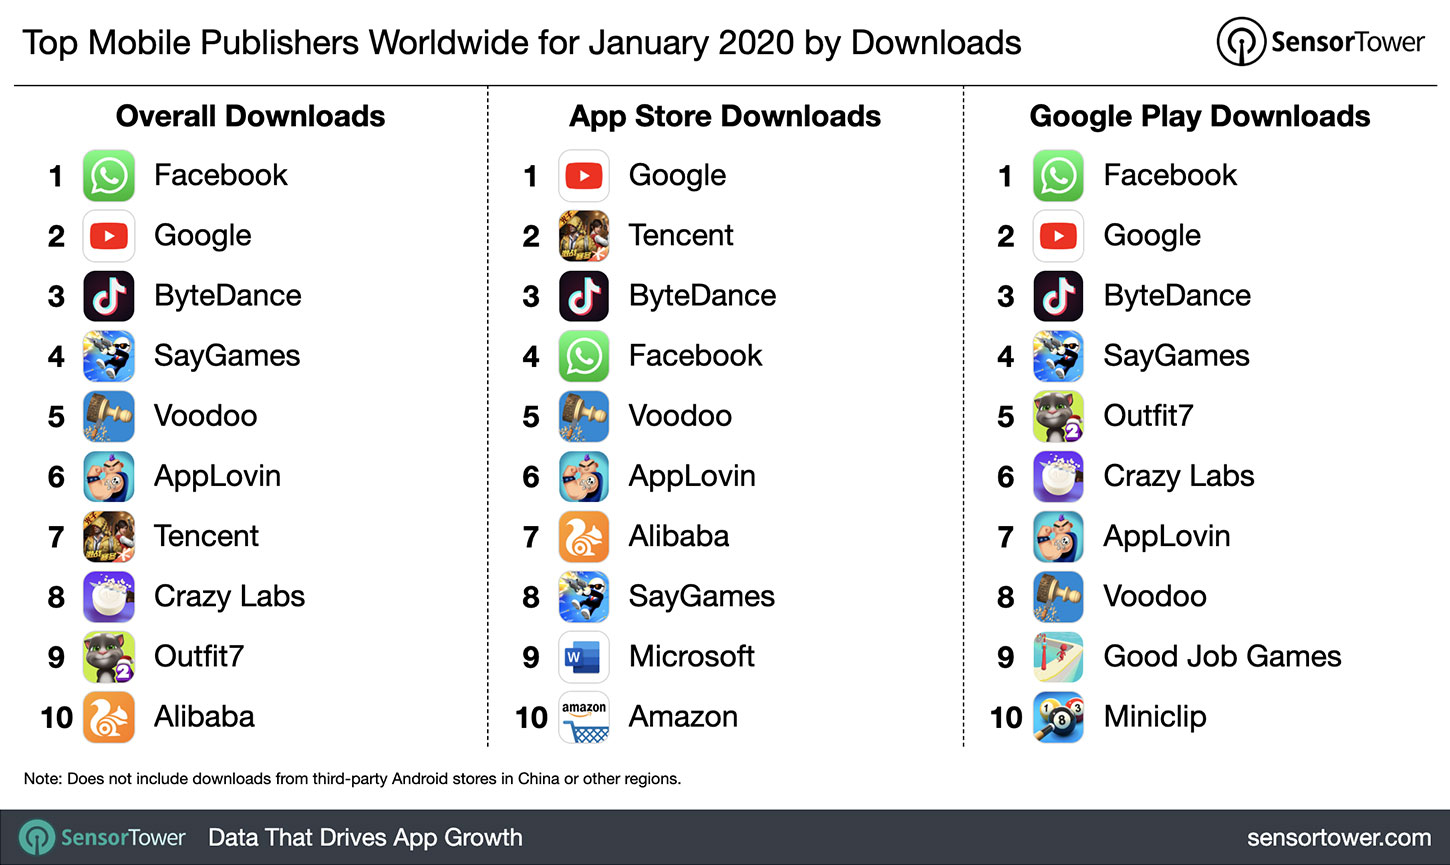 Top Mobile Publishers Worldwide for January 2020 by Downloads